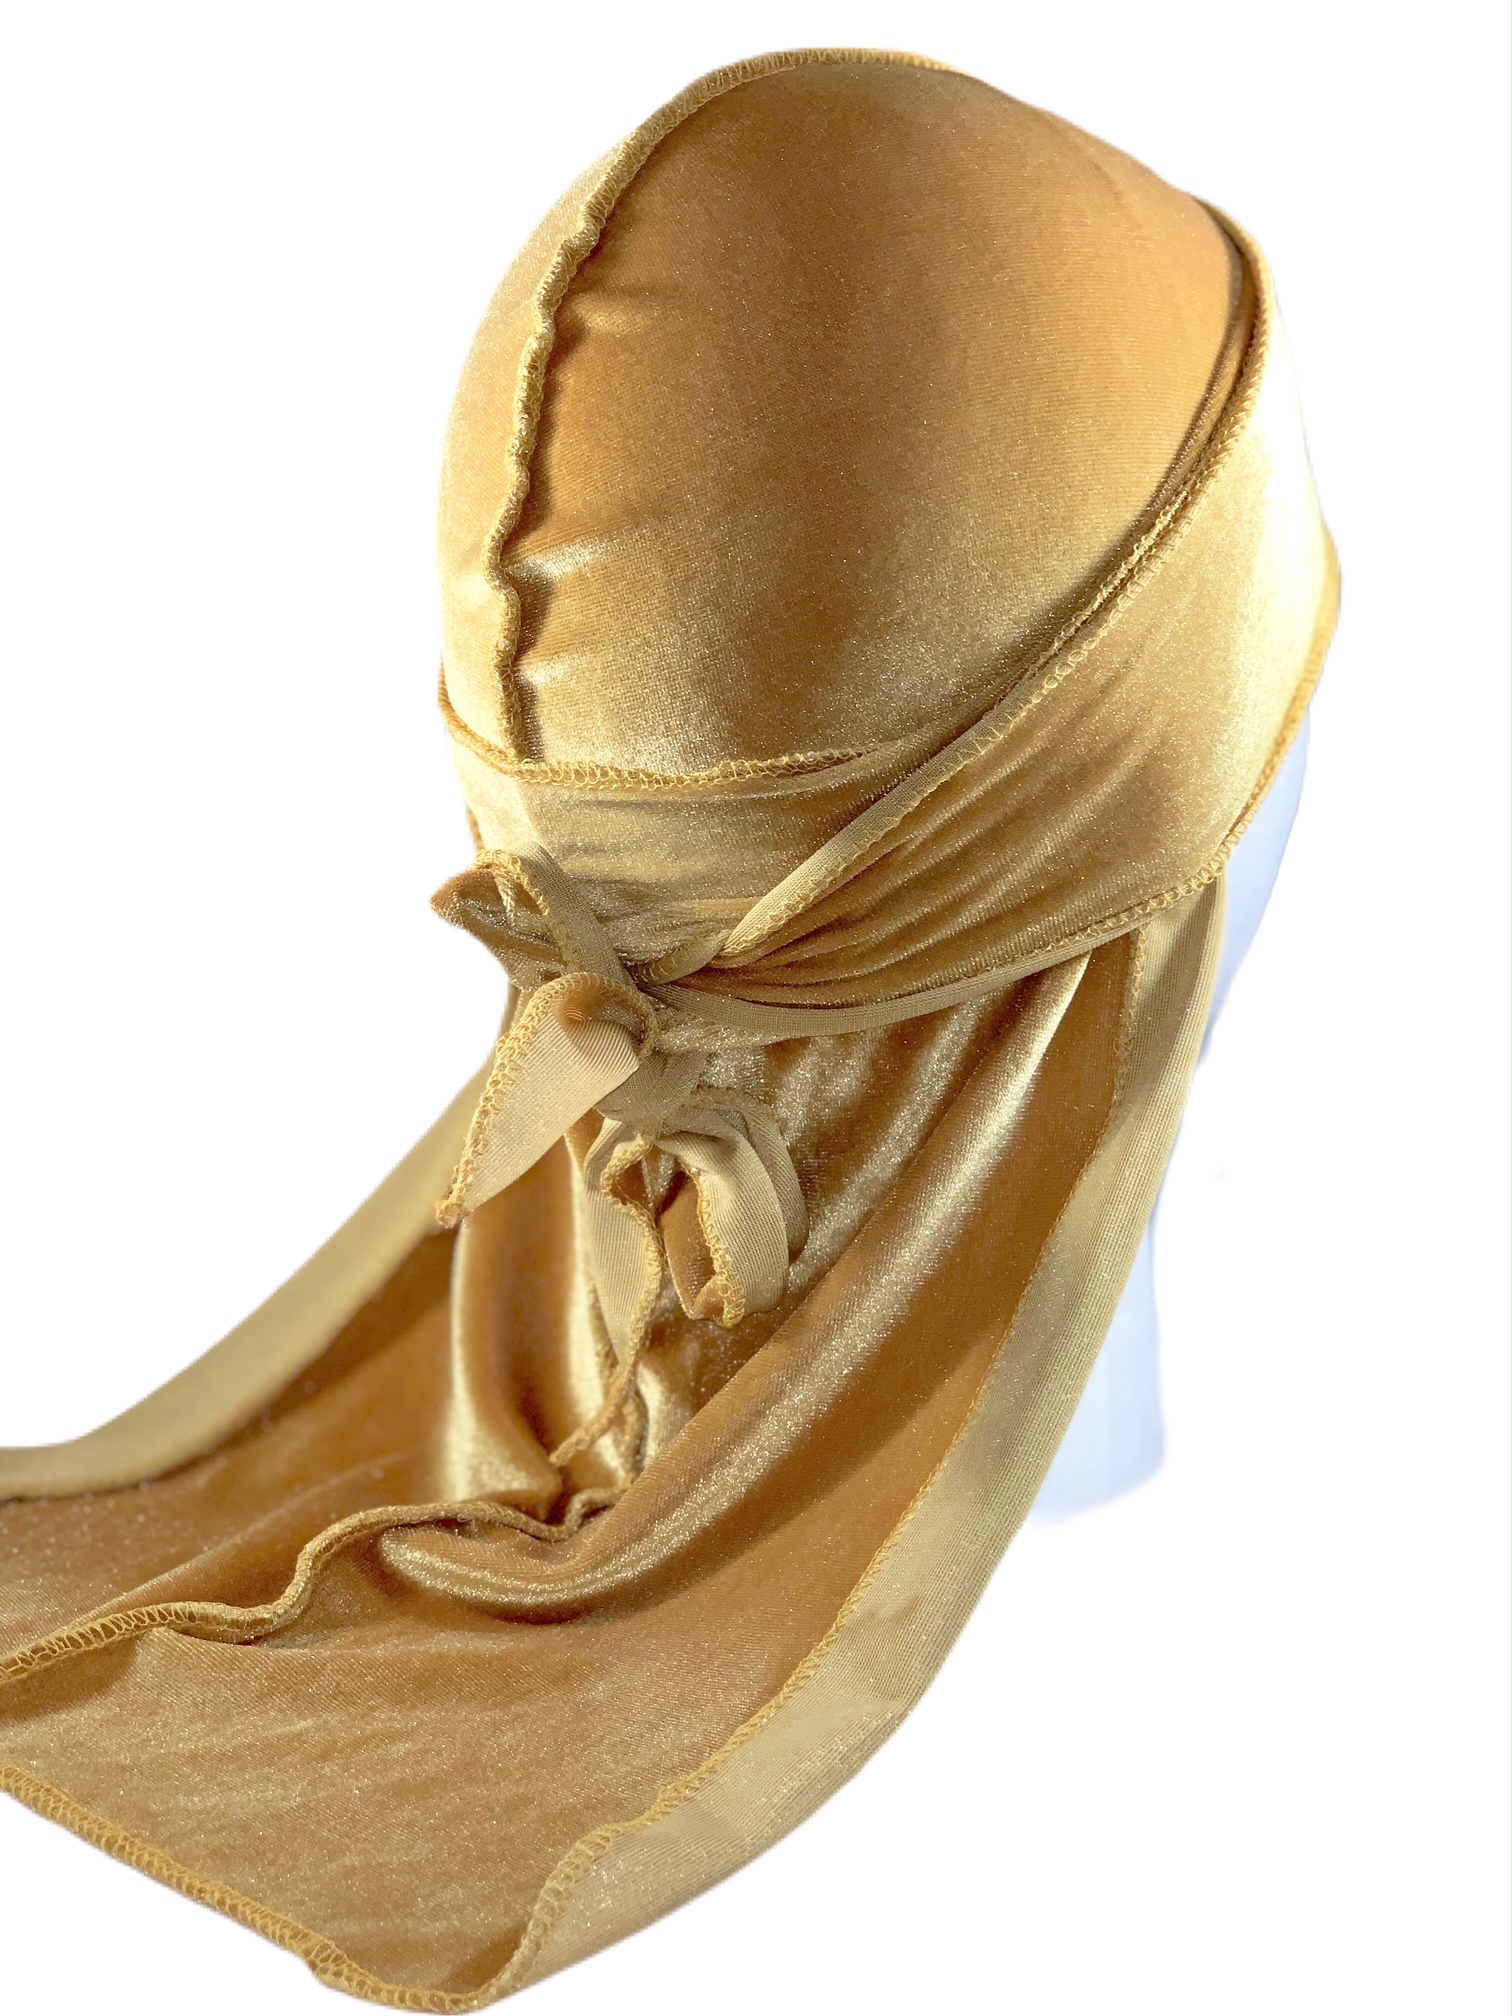 Velvet Durags in the color gold